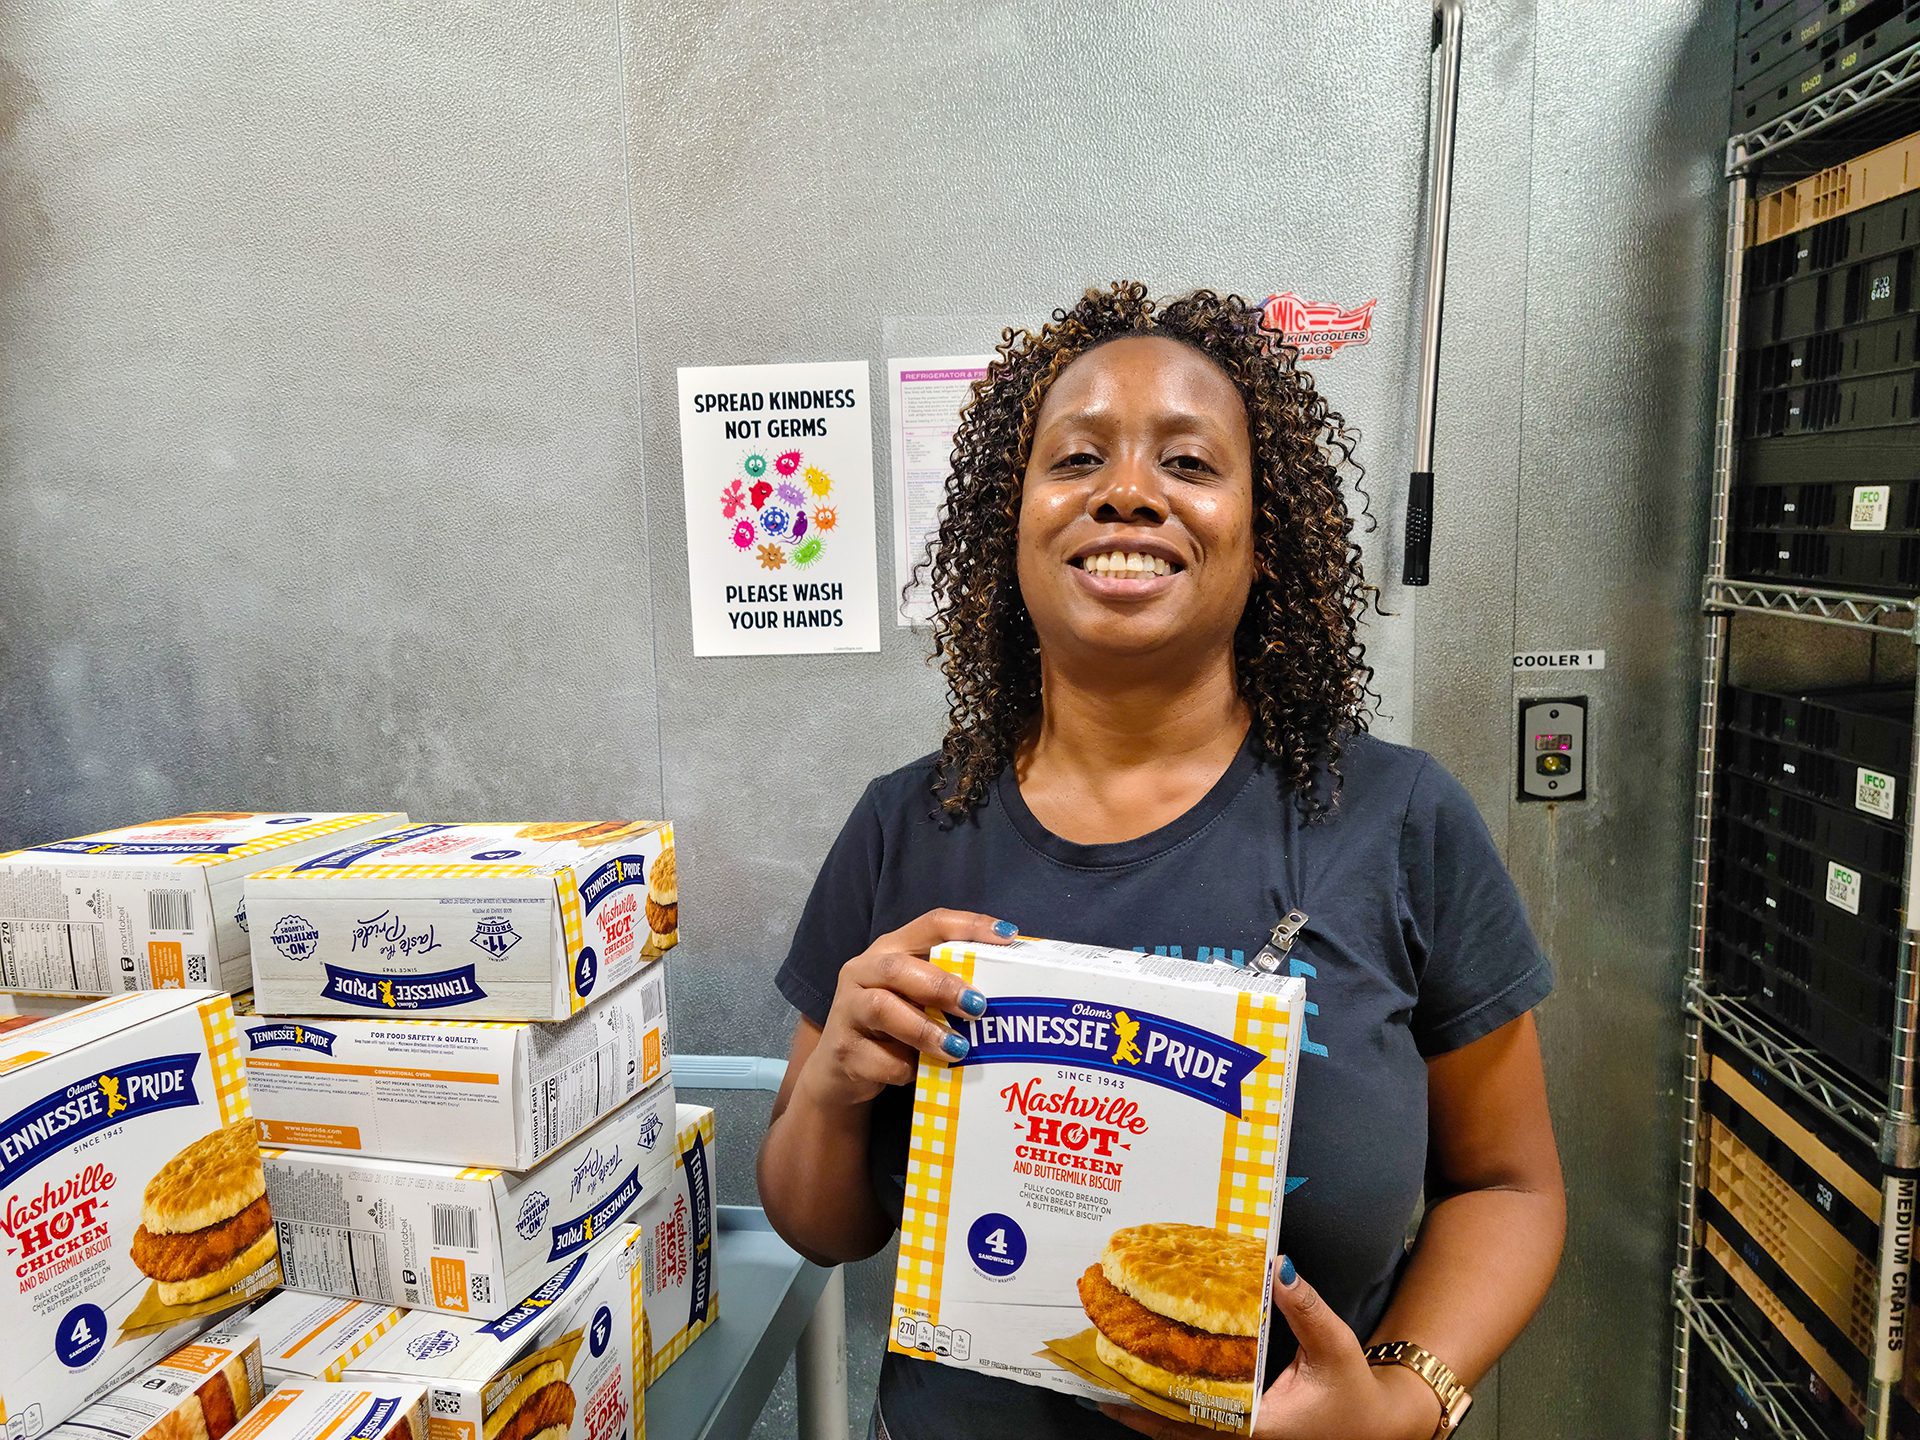 Shanna volunteers at Amazing Grace Food Pantry